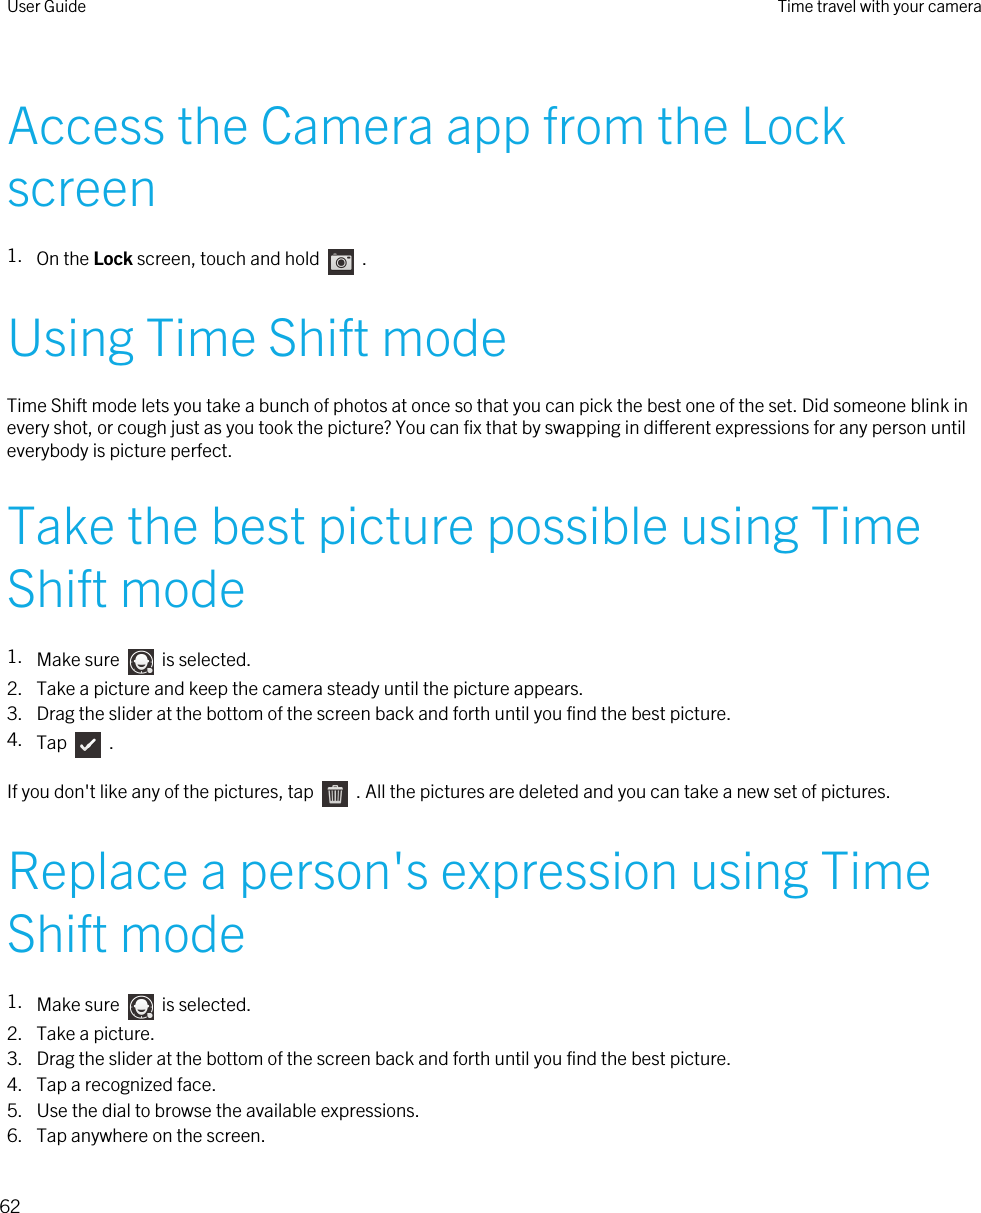 Access the Camera app from the Lock screen1. On the Lock screen, touch and hold    .Using Time Shift modeTime Shift mode lets you take a bunch of photos at once so that you can pick the best one of the set. Did someone blink in every shot, or cough just as you took the picture? You can fix that by swapping in different expressions for any person until everybody is picture perfect.Take the best picture possible using Time Shift mode1. Make sure    is selected.2. Take a picture and keep the camera steady until the picture appears.3. Drag the slider at the bottom of the screen back and forth until you find the best picture.4. Tap    .If you don&apos;t like any of the pictures, tap    . All the pictures are deleted and you can take a new set of pictures.Replace a person&apos;s expression using Time Shift mode1. Make sure    is selected.2. Take a picture.3. Drag the slider at the bottom of the screen back and forth until you find the best picture.4. Tap a recognized face.5. Use the dial to browse the available expressions.6. Tap anywhere on the screen.User Guide Time travel with your camera62 